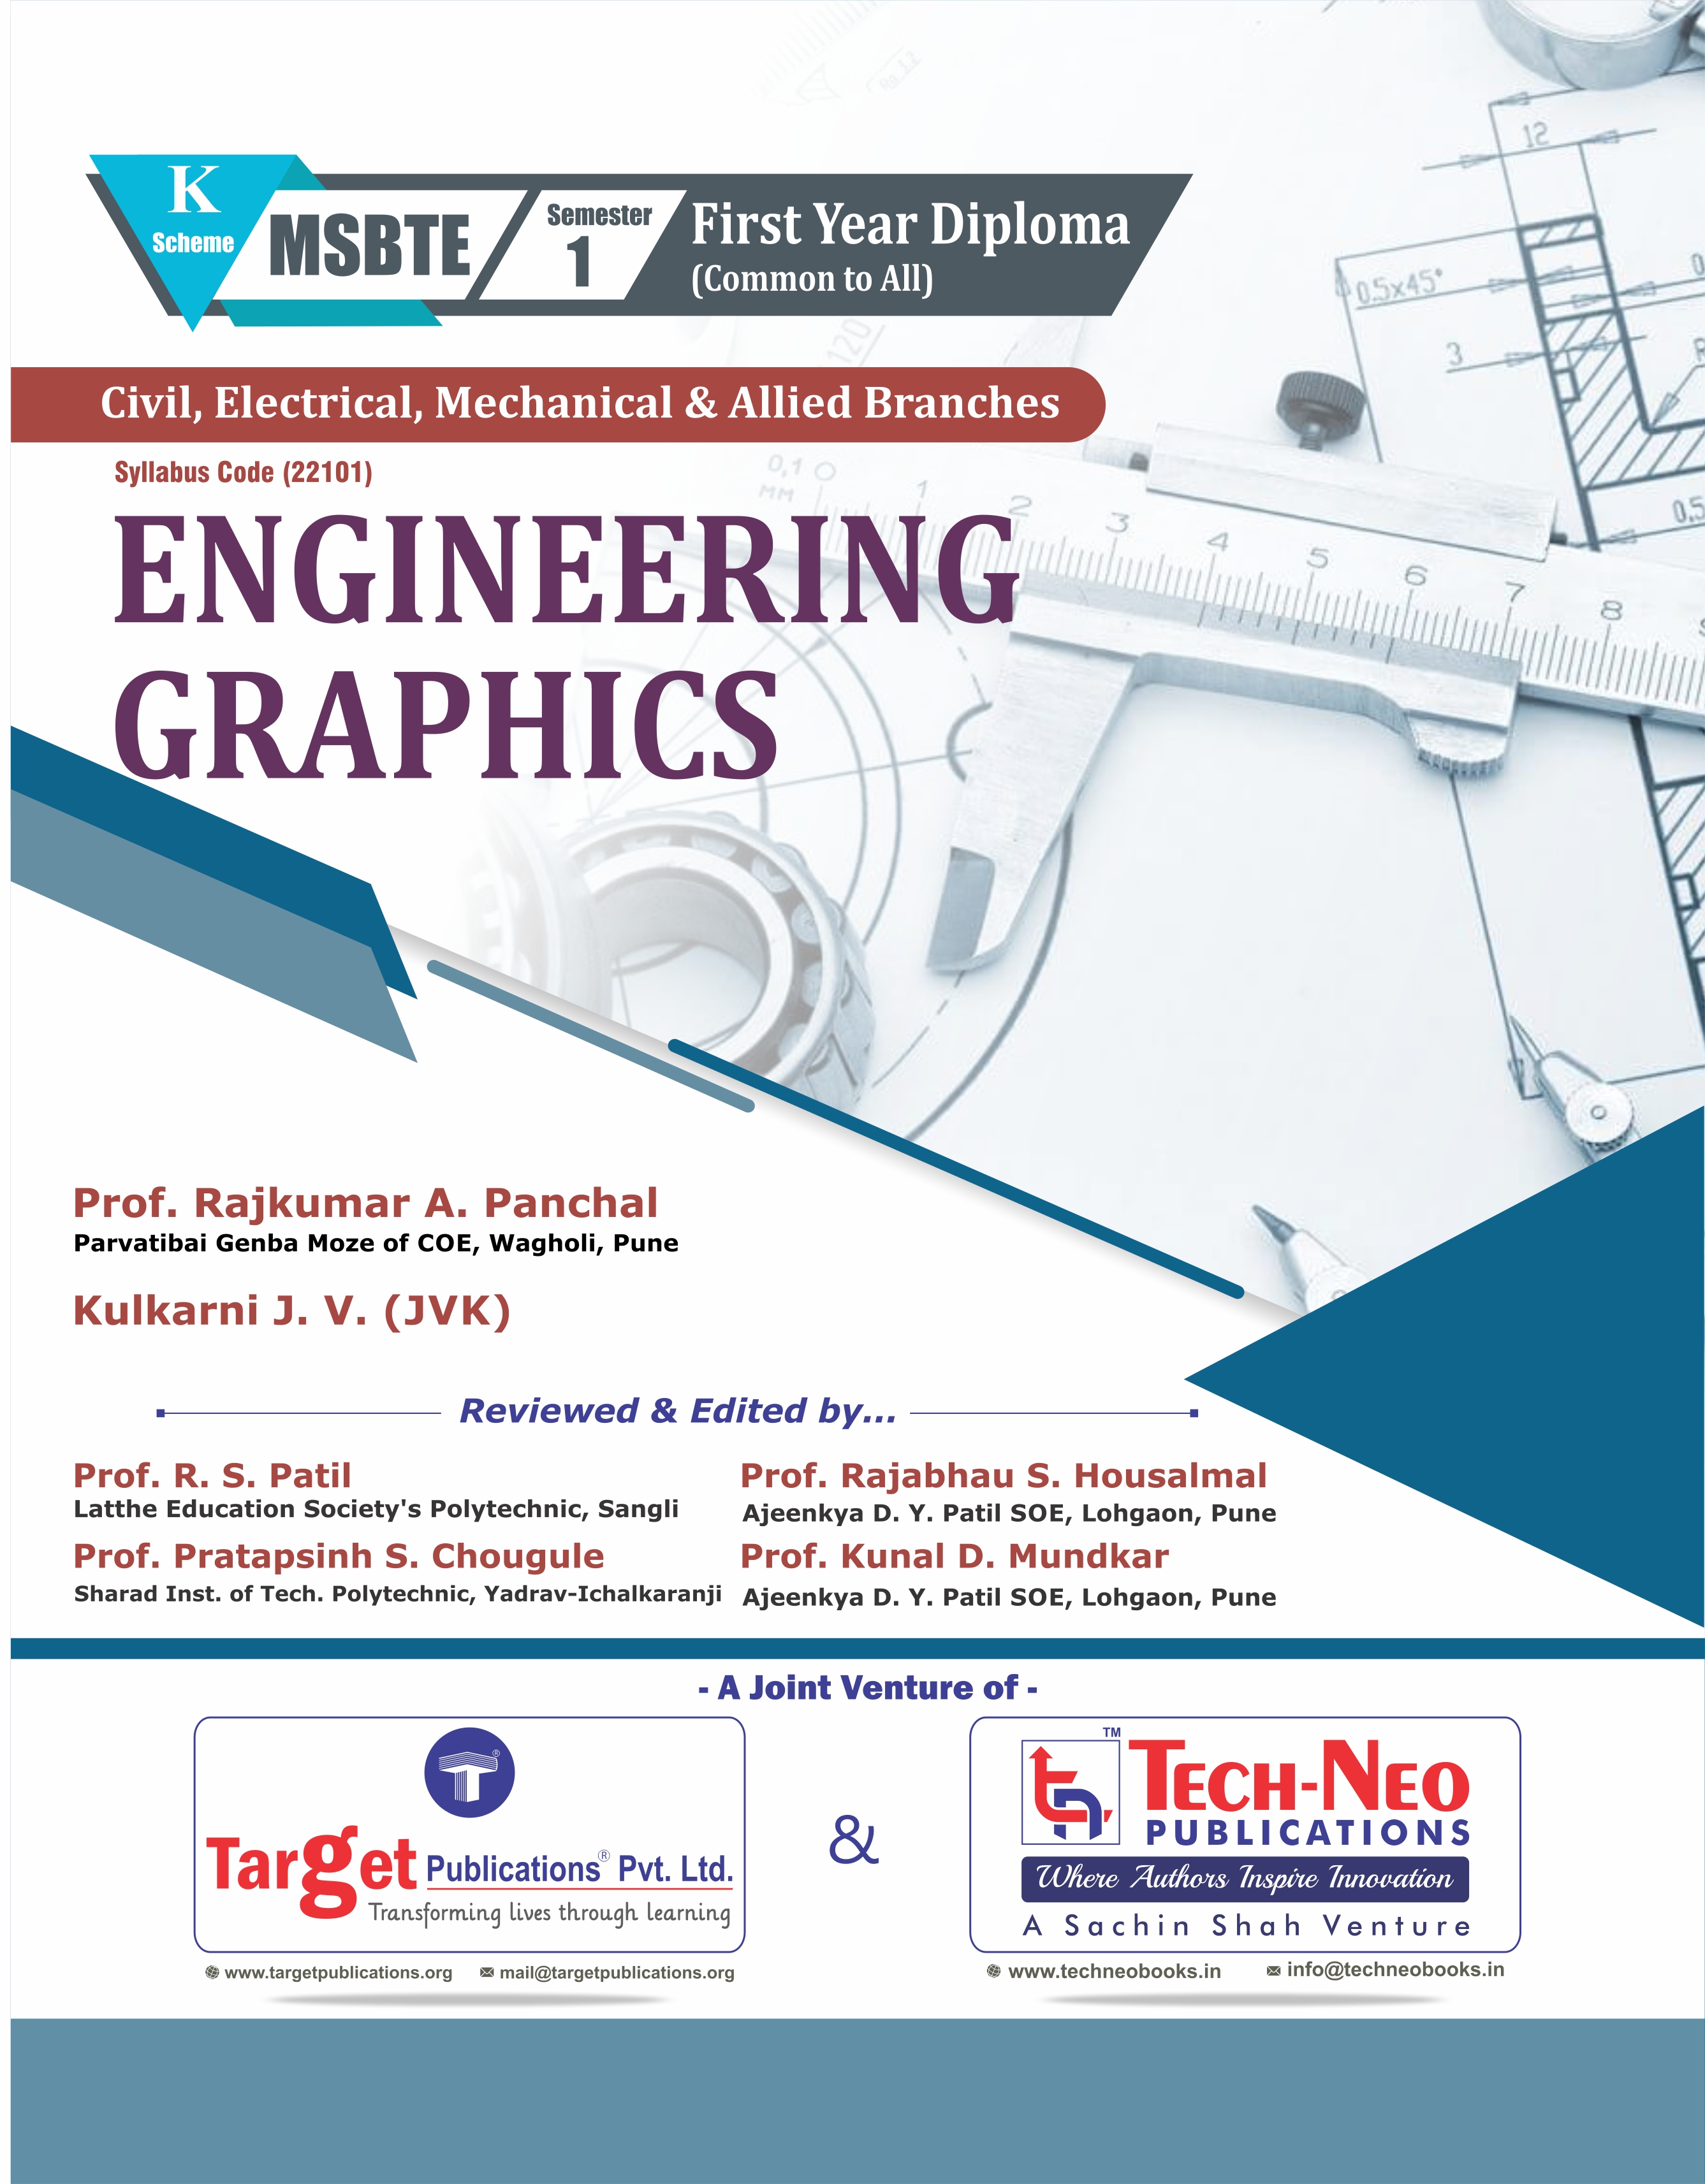 Engineering Graphics_(Civil, Electrical, Mechanical & Allied) (3245)